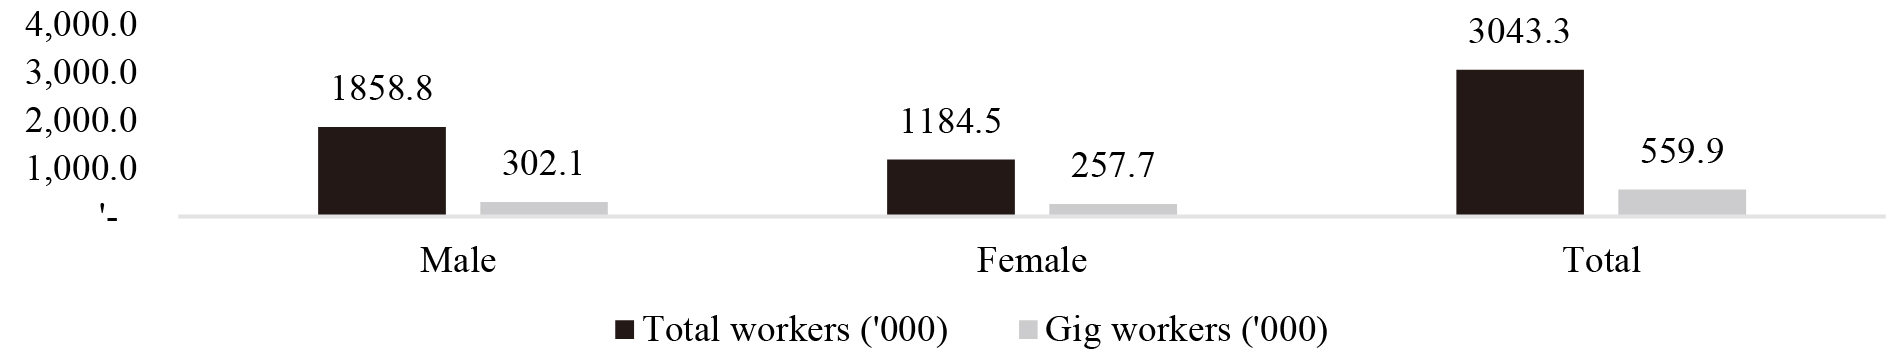 Number of total workers and gig workers by sex, Malaysia, 2018. Source: Authors’ estimates based on 2018 Labour Force Survey data, (DOSM).